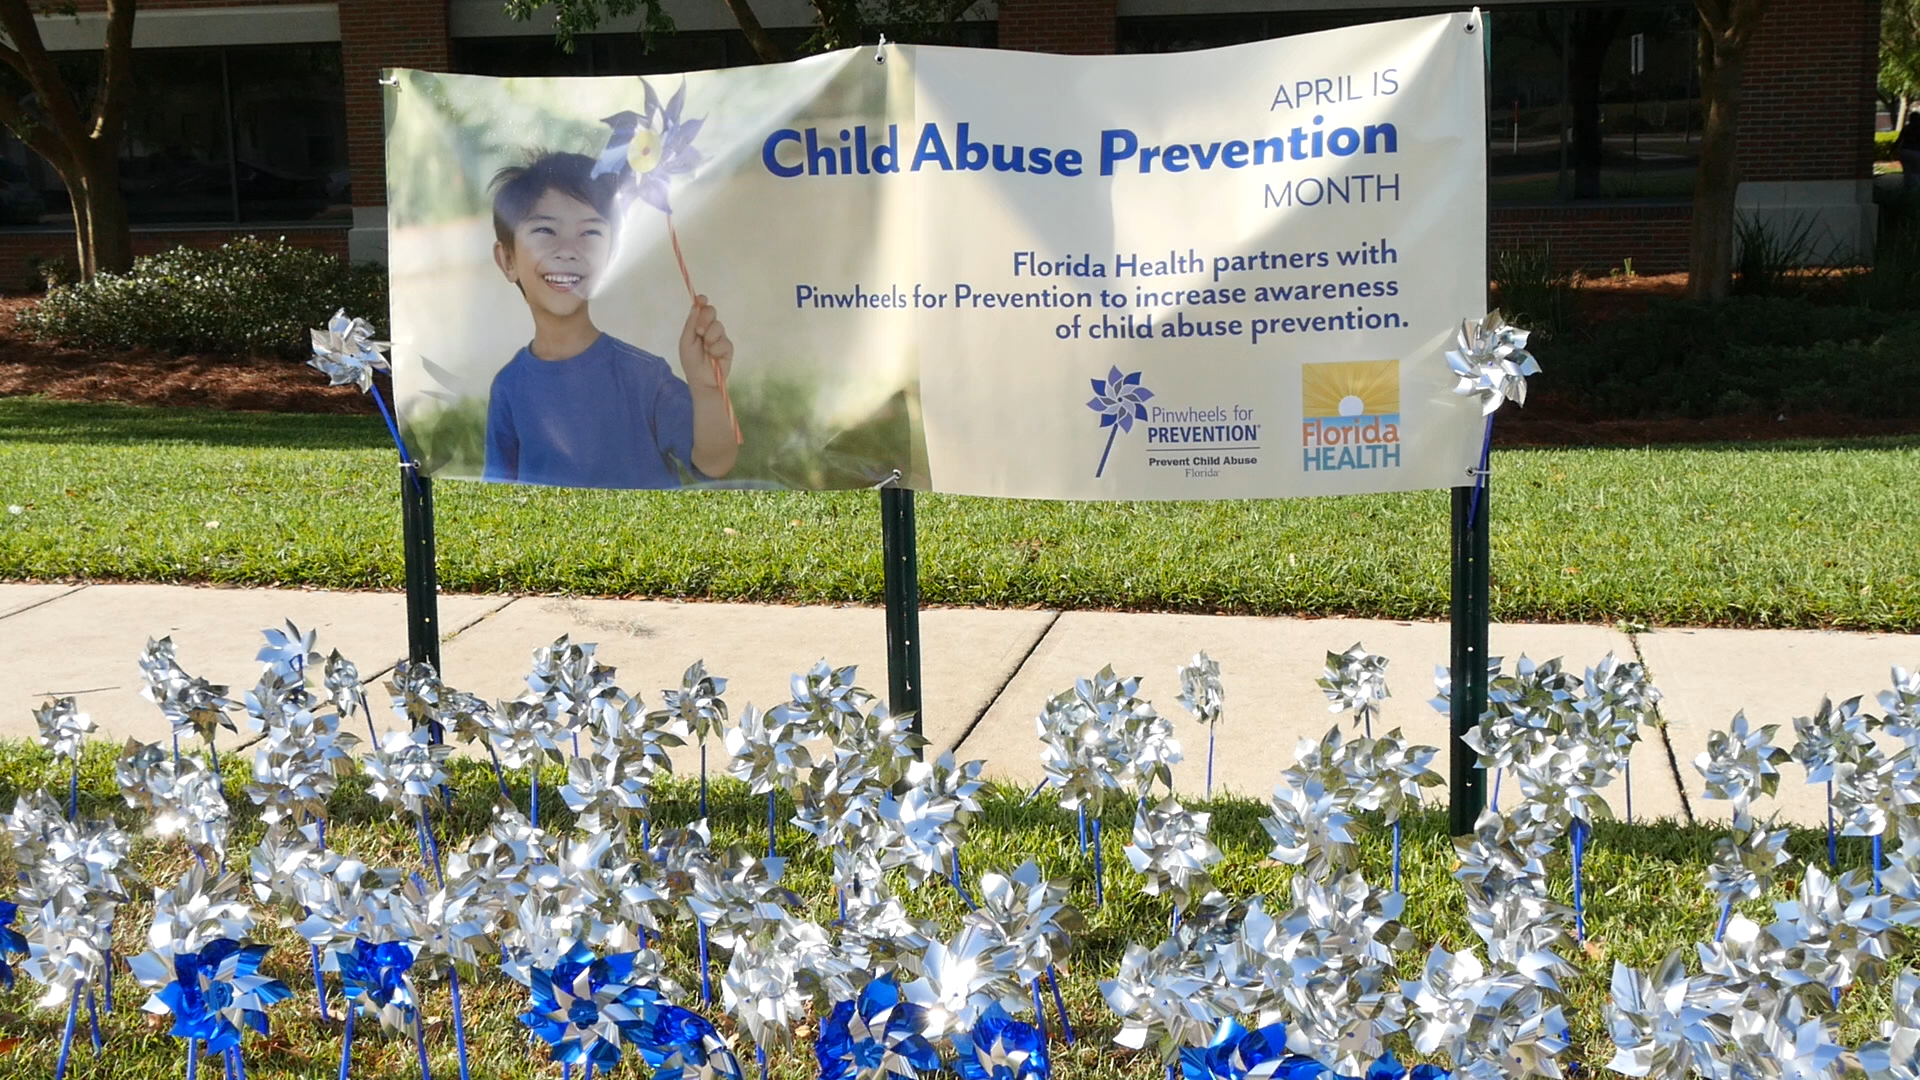 Planting Pinwheels to Raise Awareness for Child Abuse Prevention Month 2017